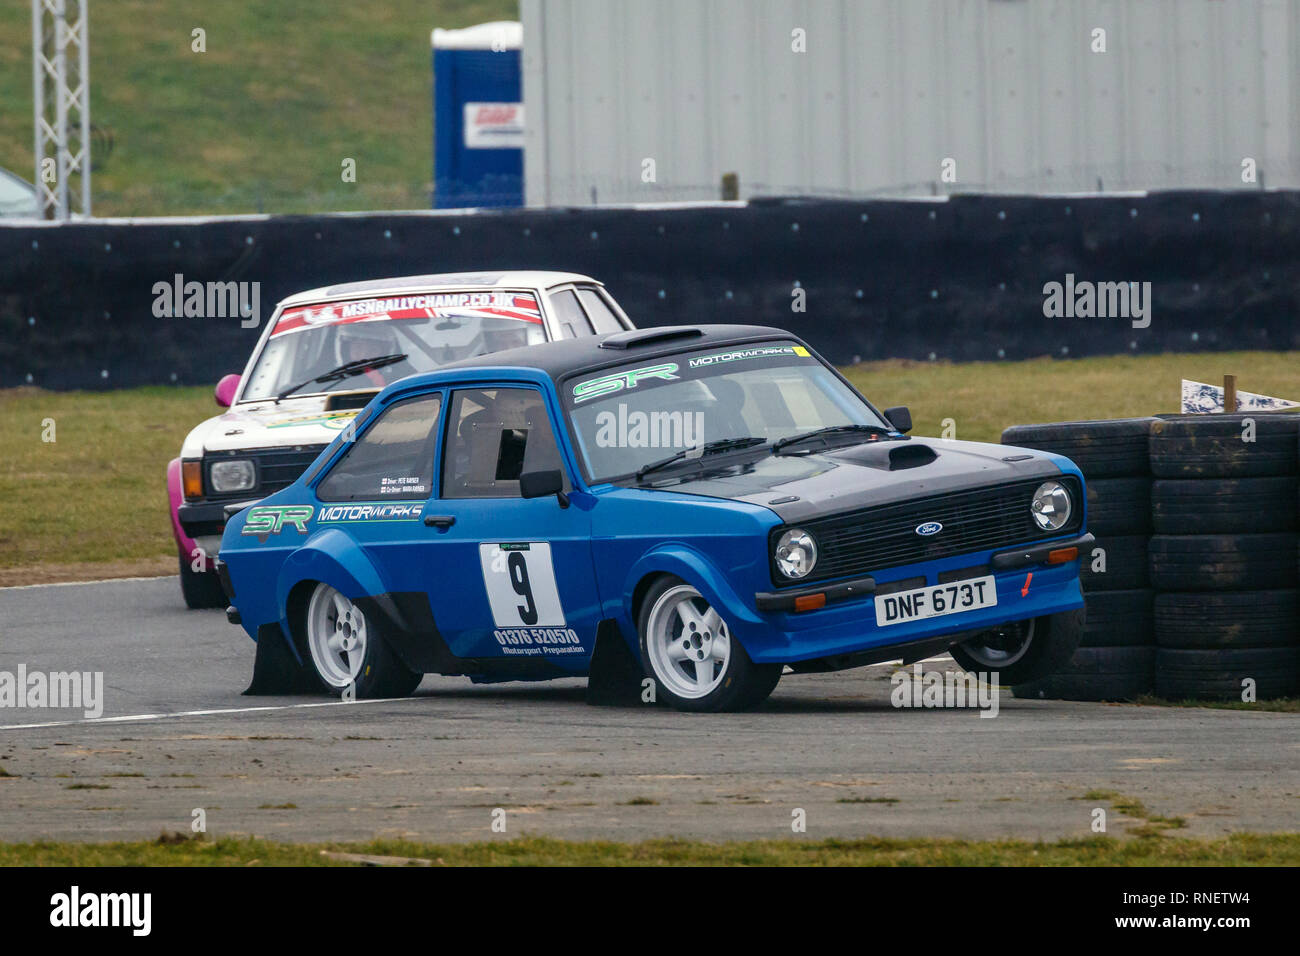 Ford Escort MkII, DNF 673T, with driver Pete Rayner and co-driver Aron Rayner during the 2019 Snetterton Stage Rally, Norfolk. Stock Photo